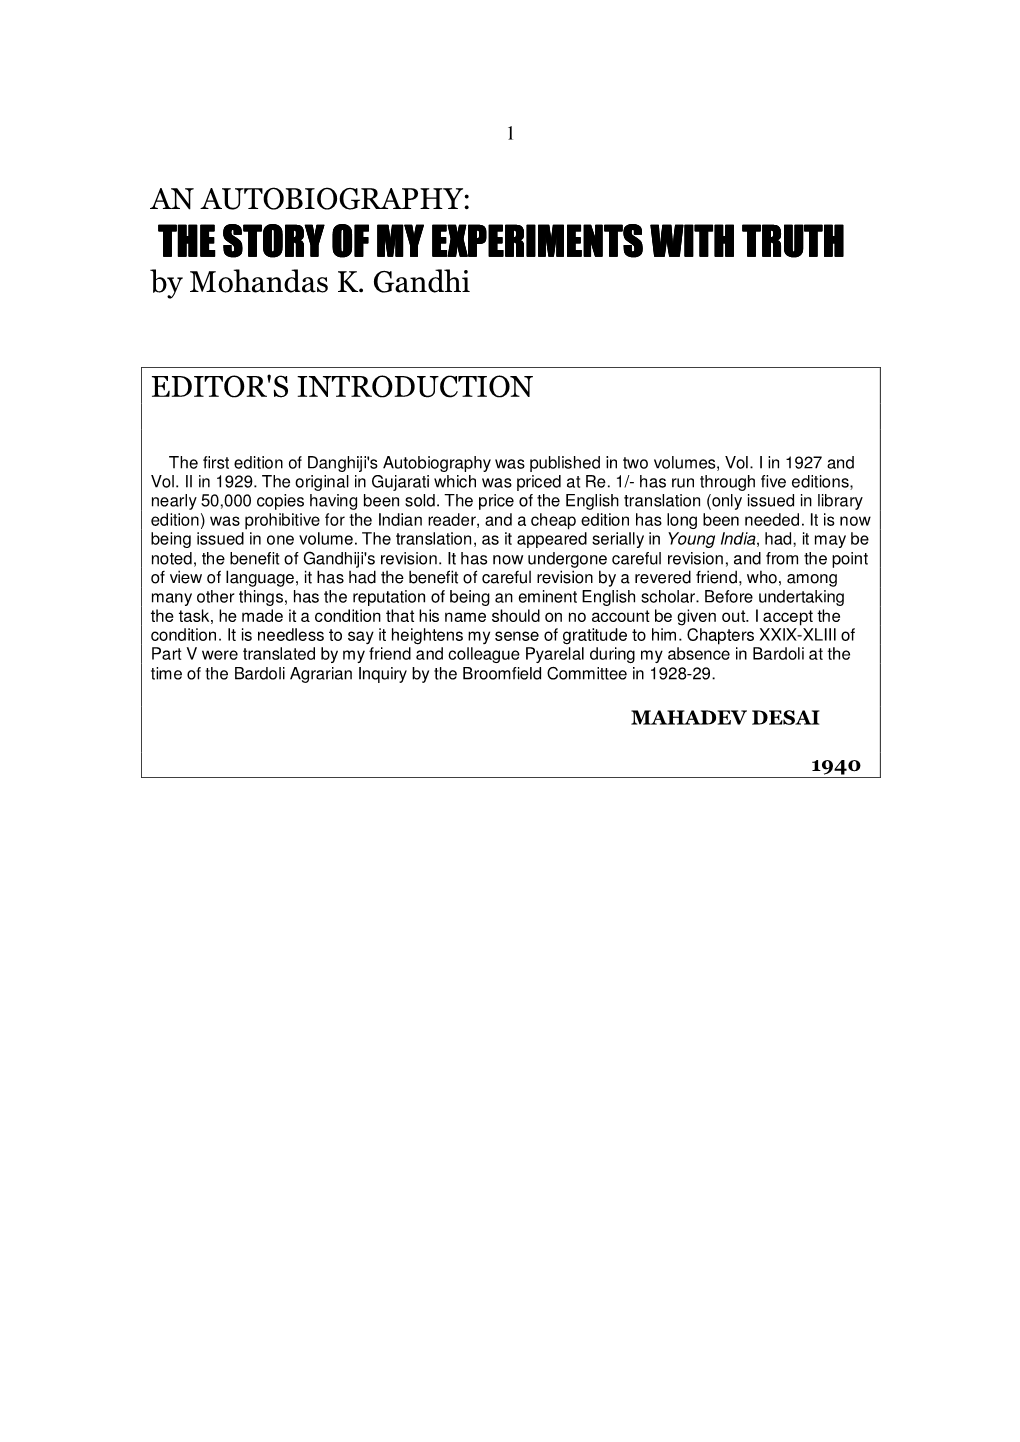 AN AUTOBIOGRAPHY: the STORY of MY EXPERIMENTS with TRUTH by Mohandas K